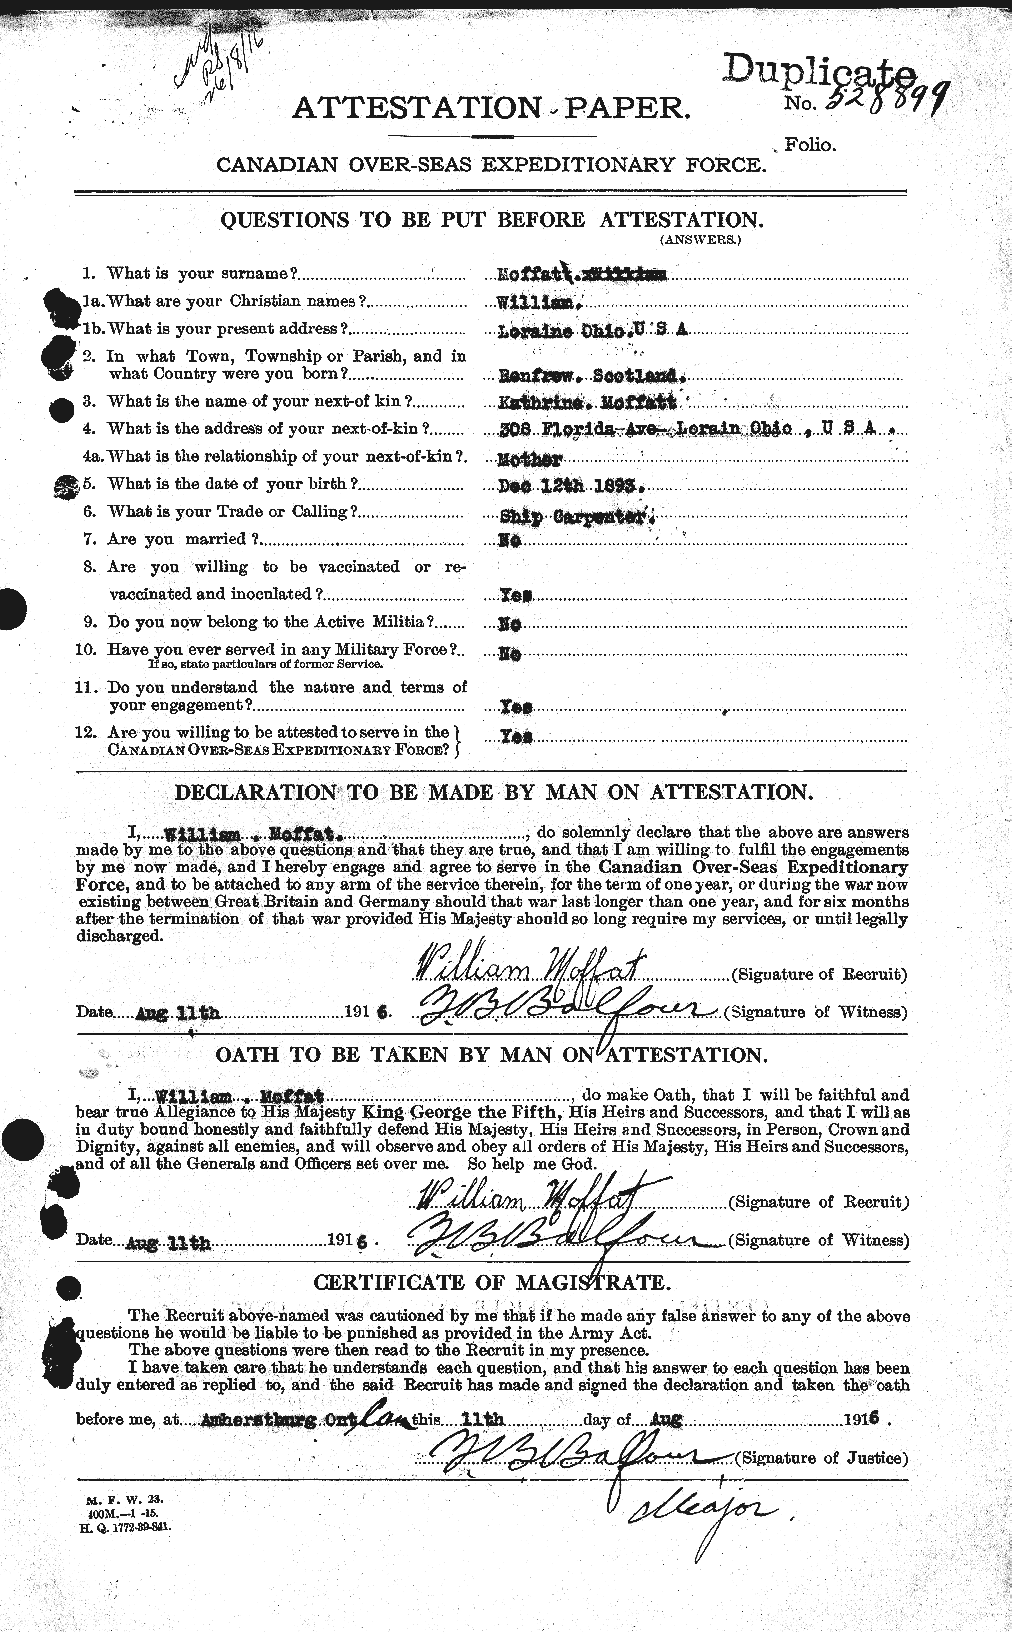 Personnel Records of the First World War - CEF 499086a